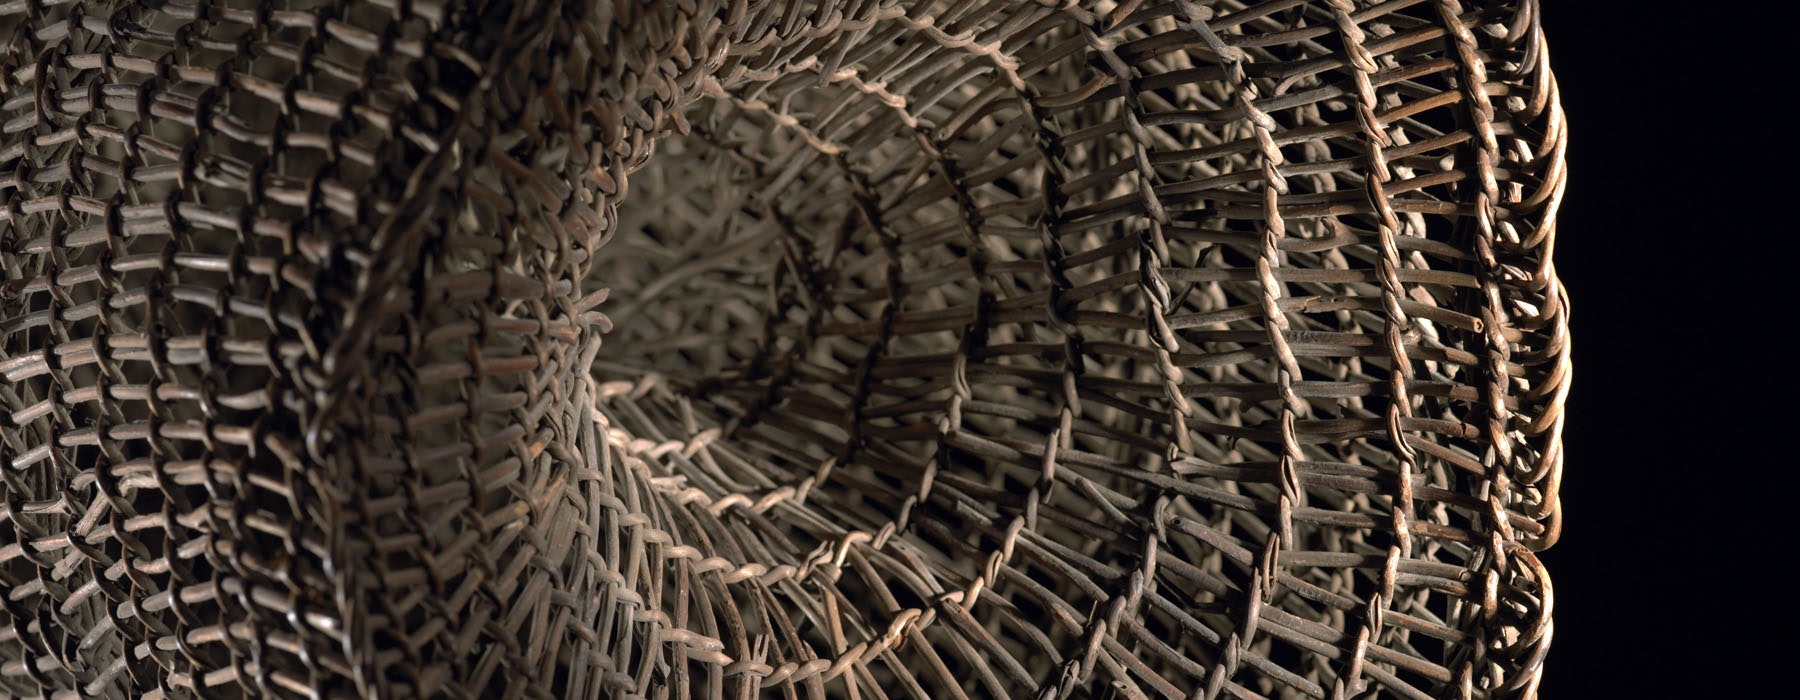 Close-up of a hīnaki (eel trap) showing its weavings